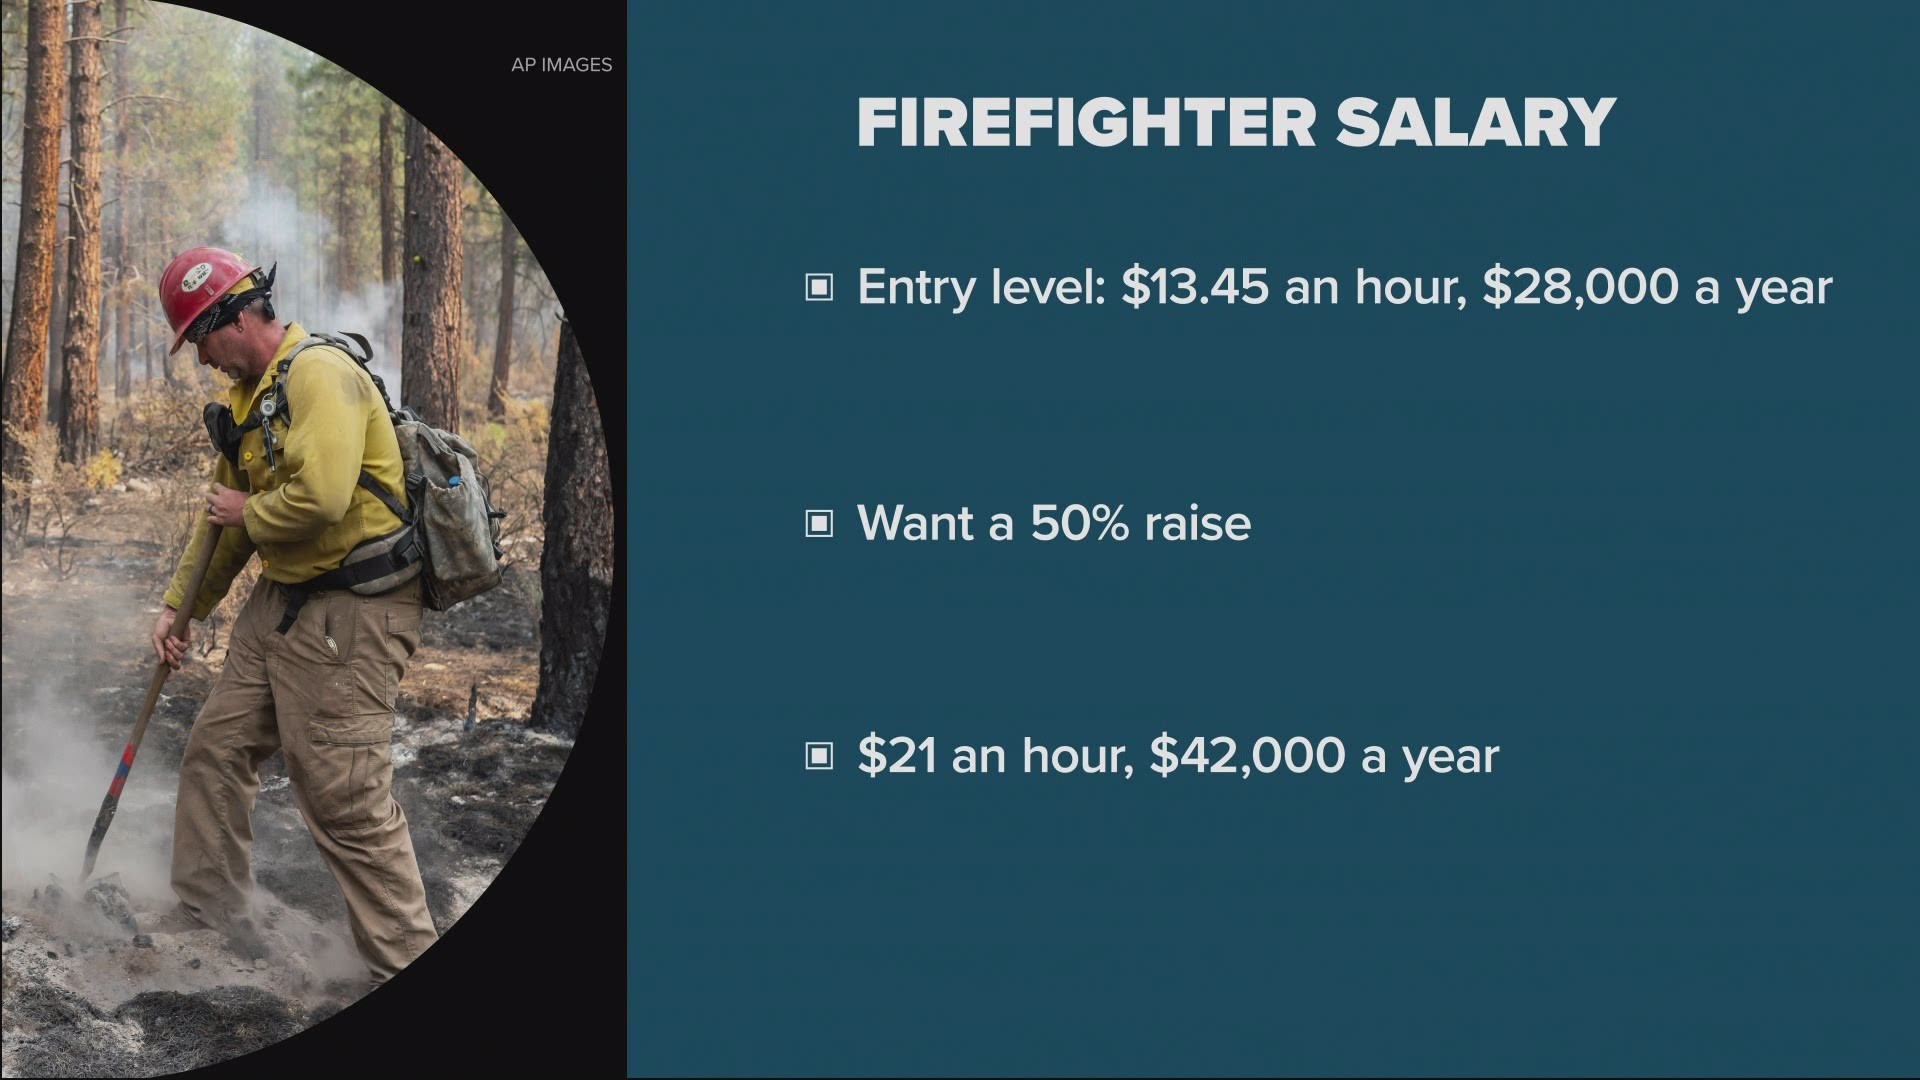 Dan found a listing for a job at Burgerville that pays more than an entry level firefighter position.